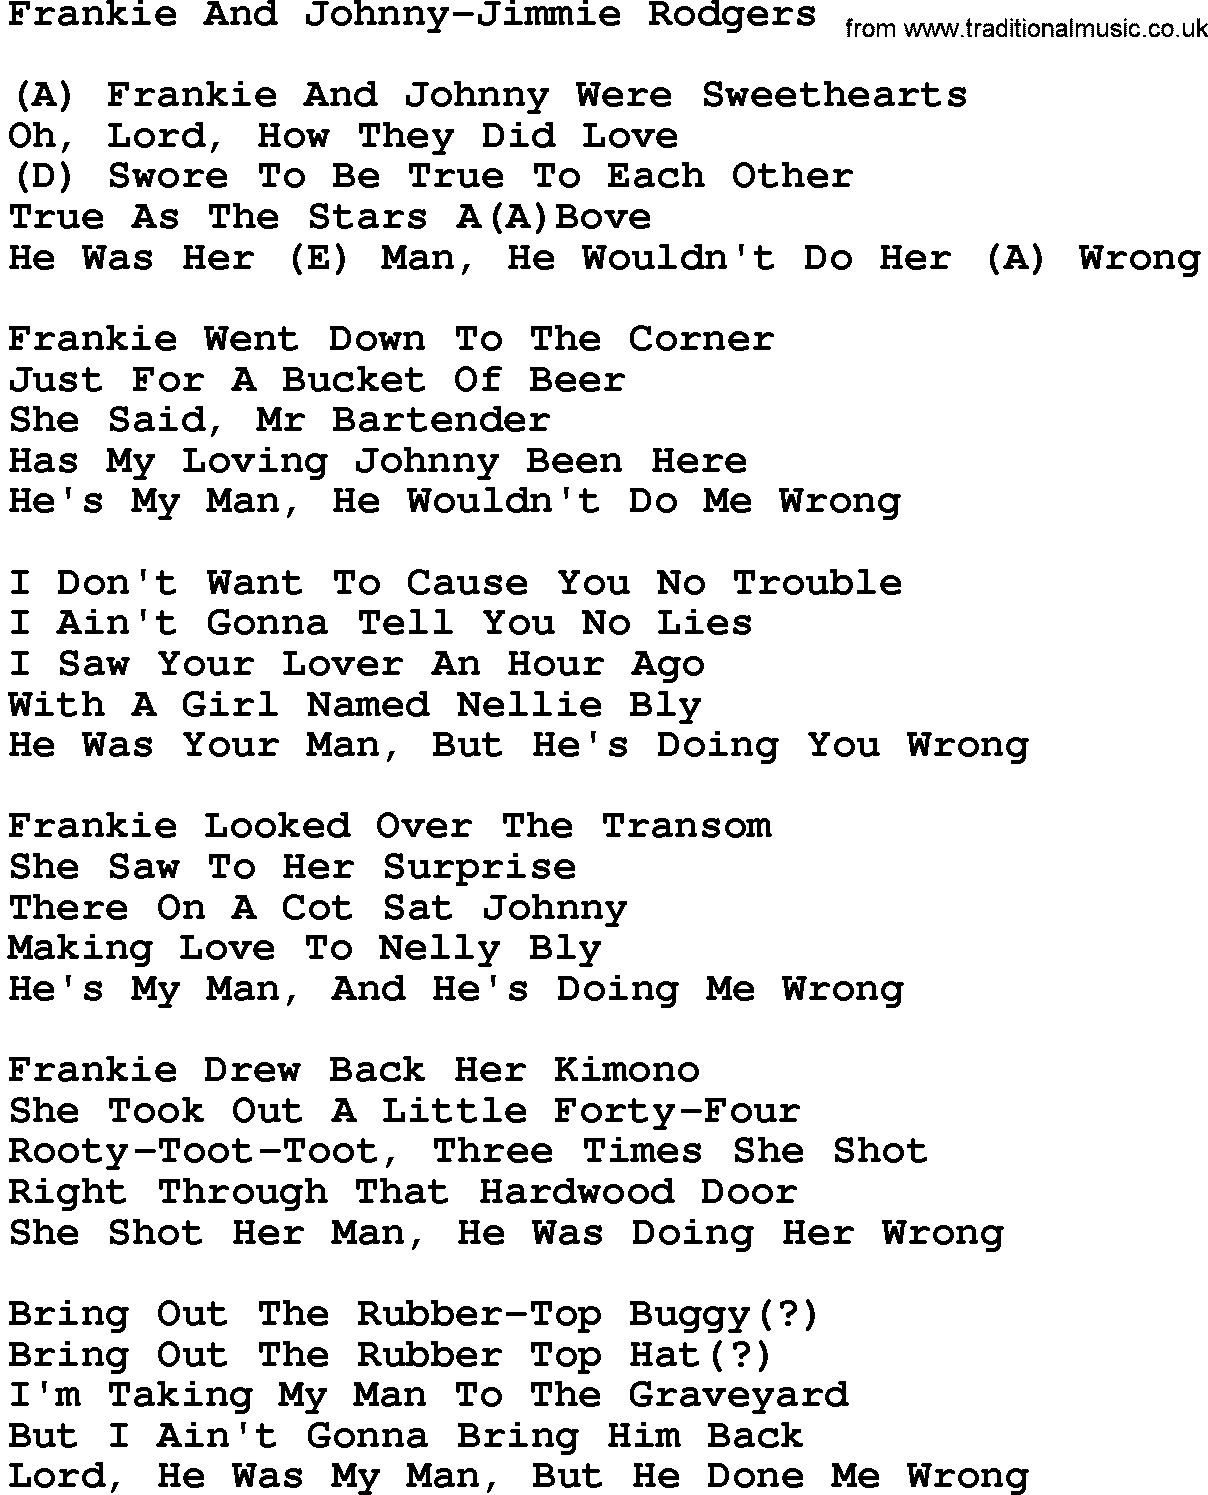 Country music song: Frankie And Johnny-Jimmie Rodgers lyrics and chords